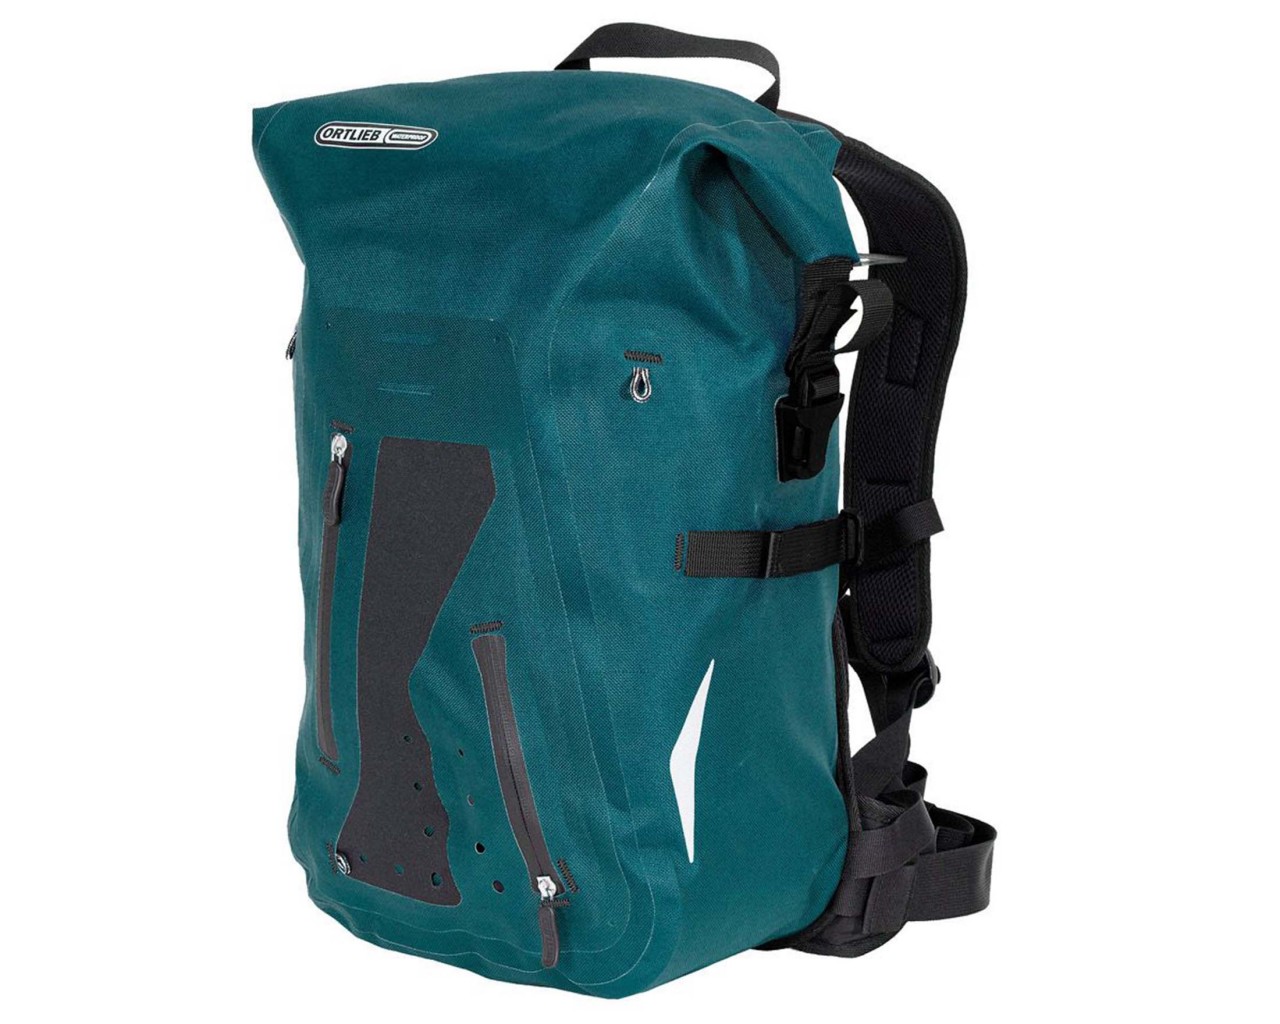 Ortlieb Packman Pro TWO 25 litres waterproof backpack PVC-free | petrol